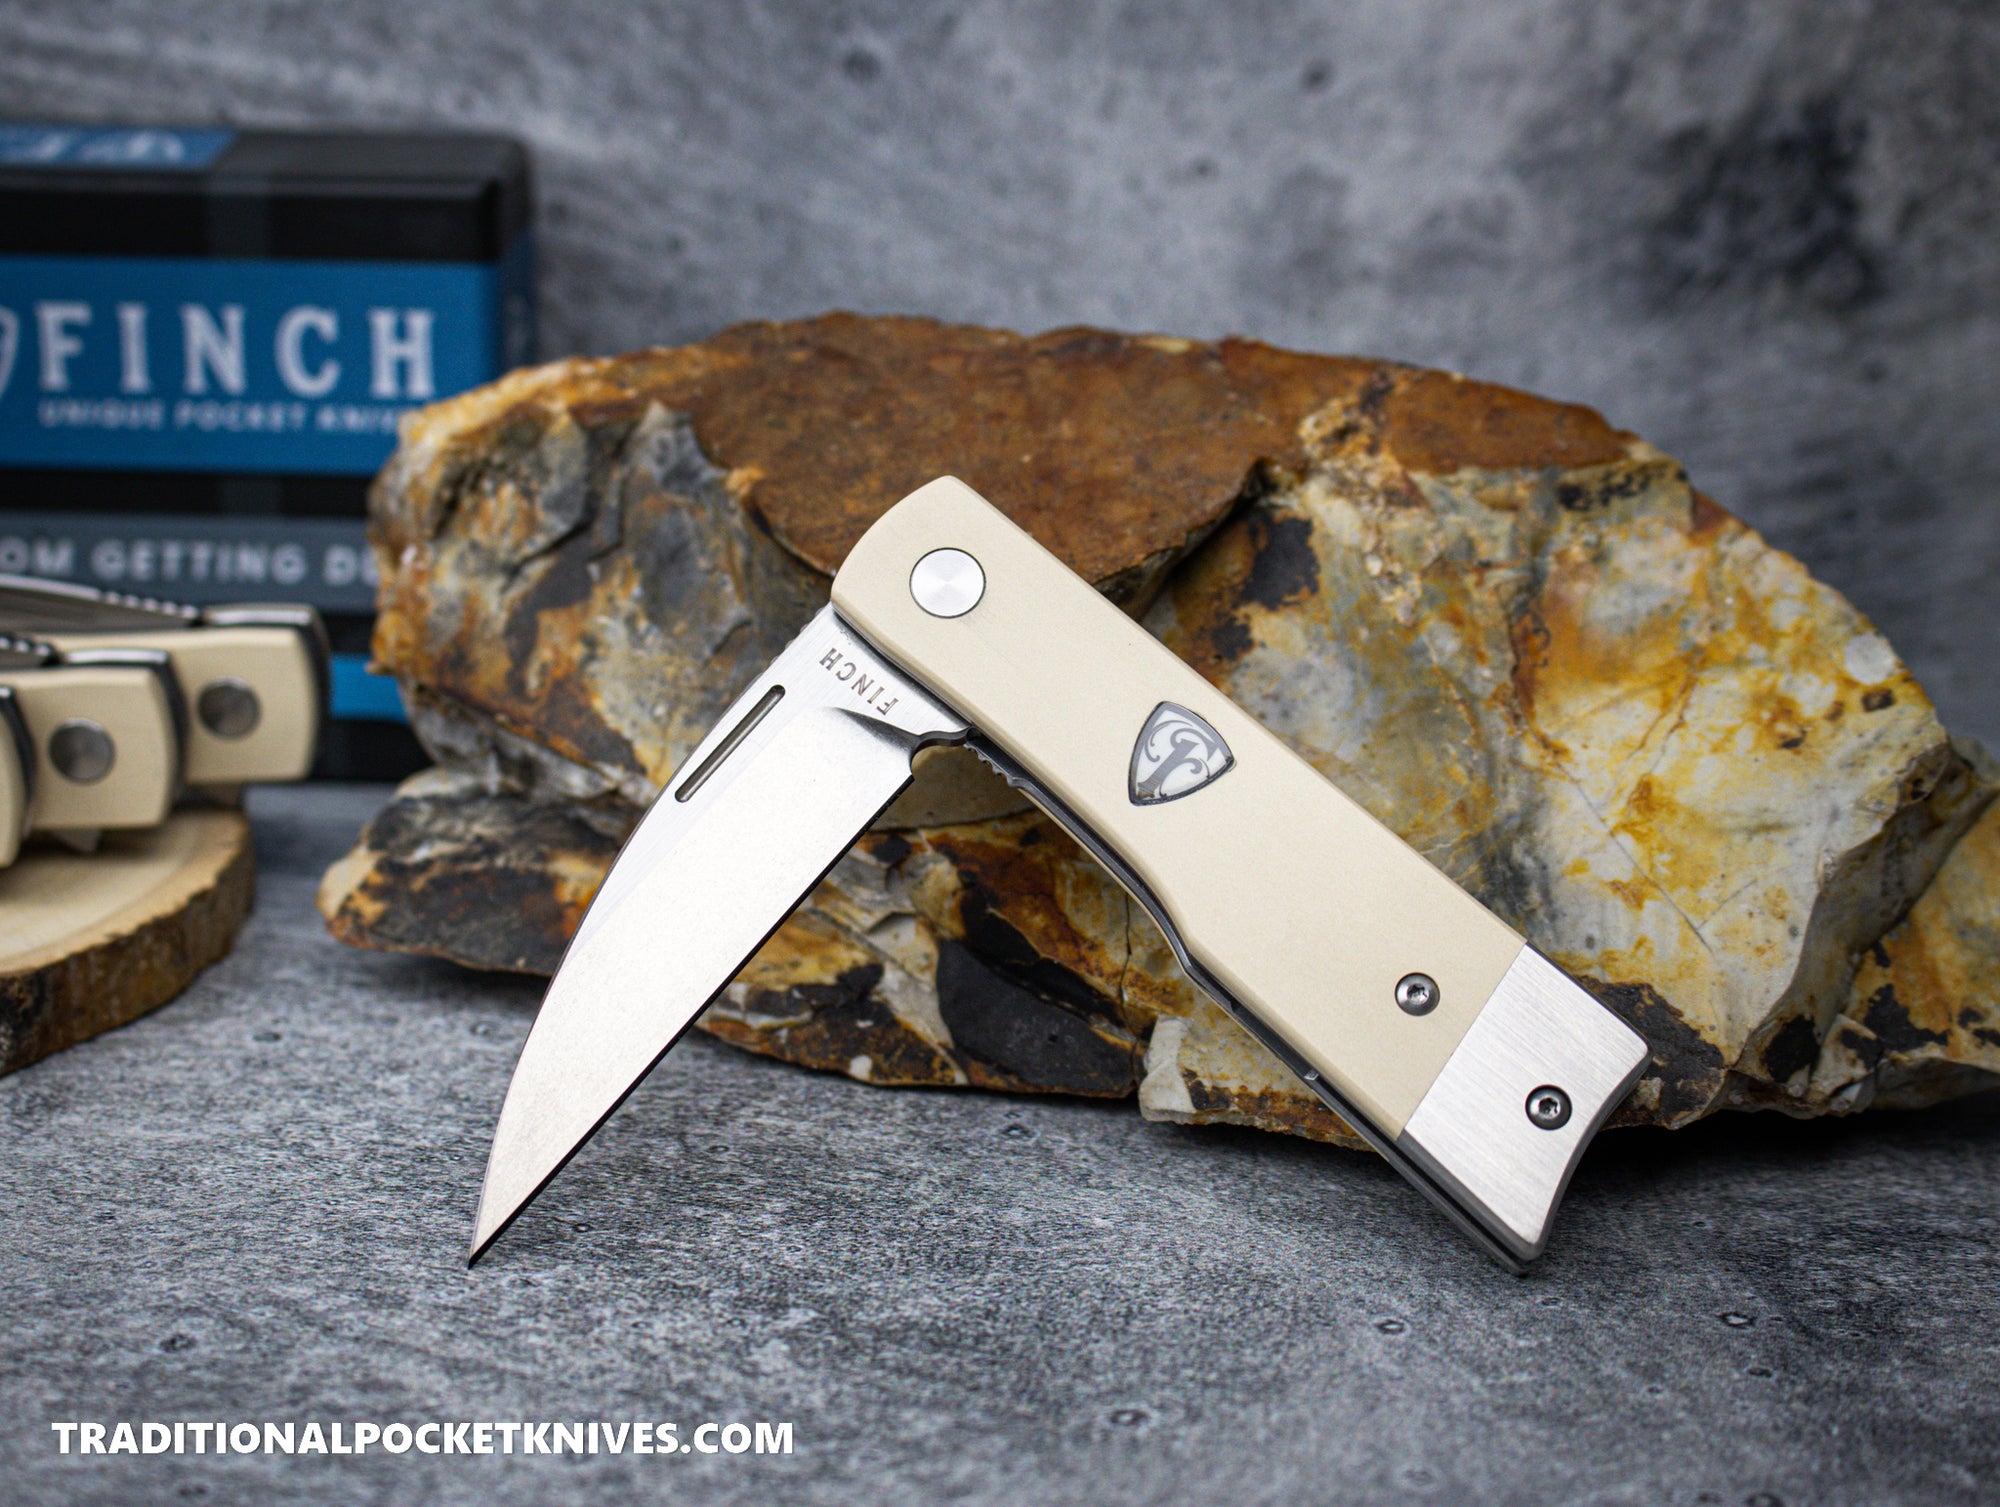 Hand Crafted The Joro: An Every Day Work Knife by The Mill